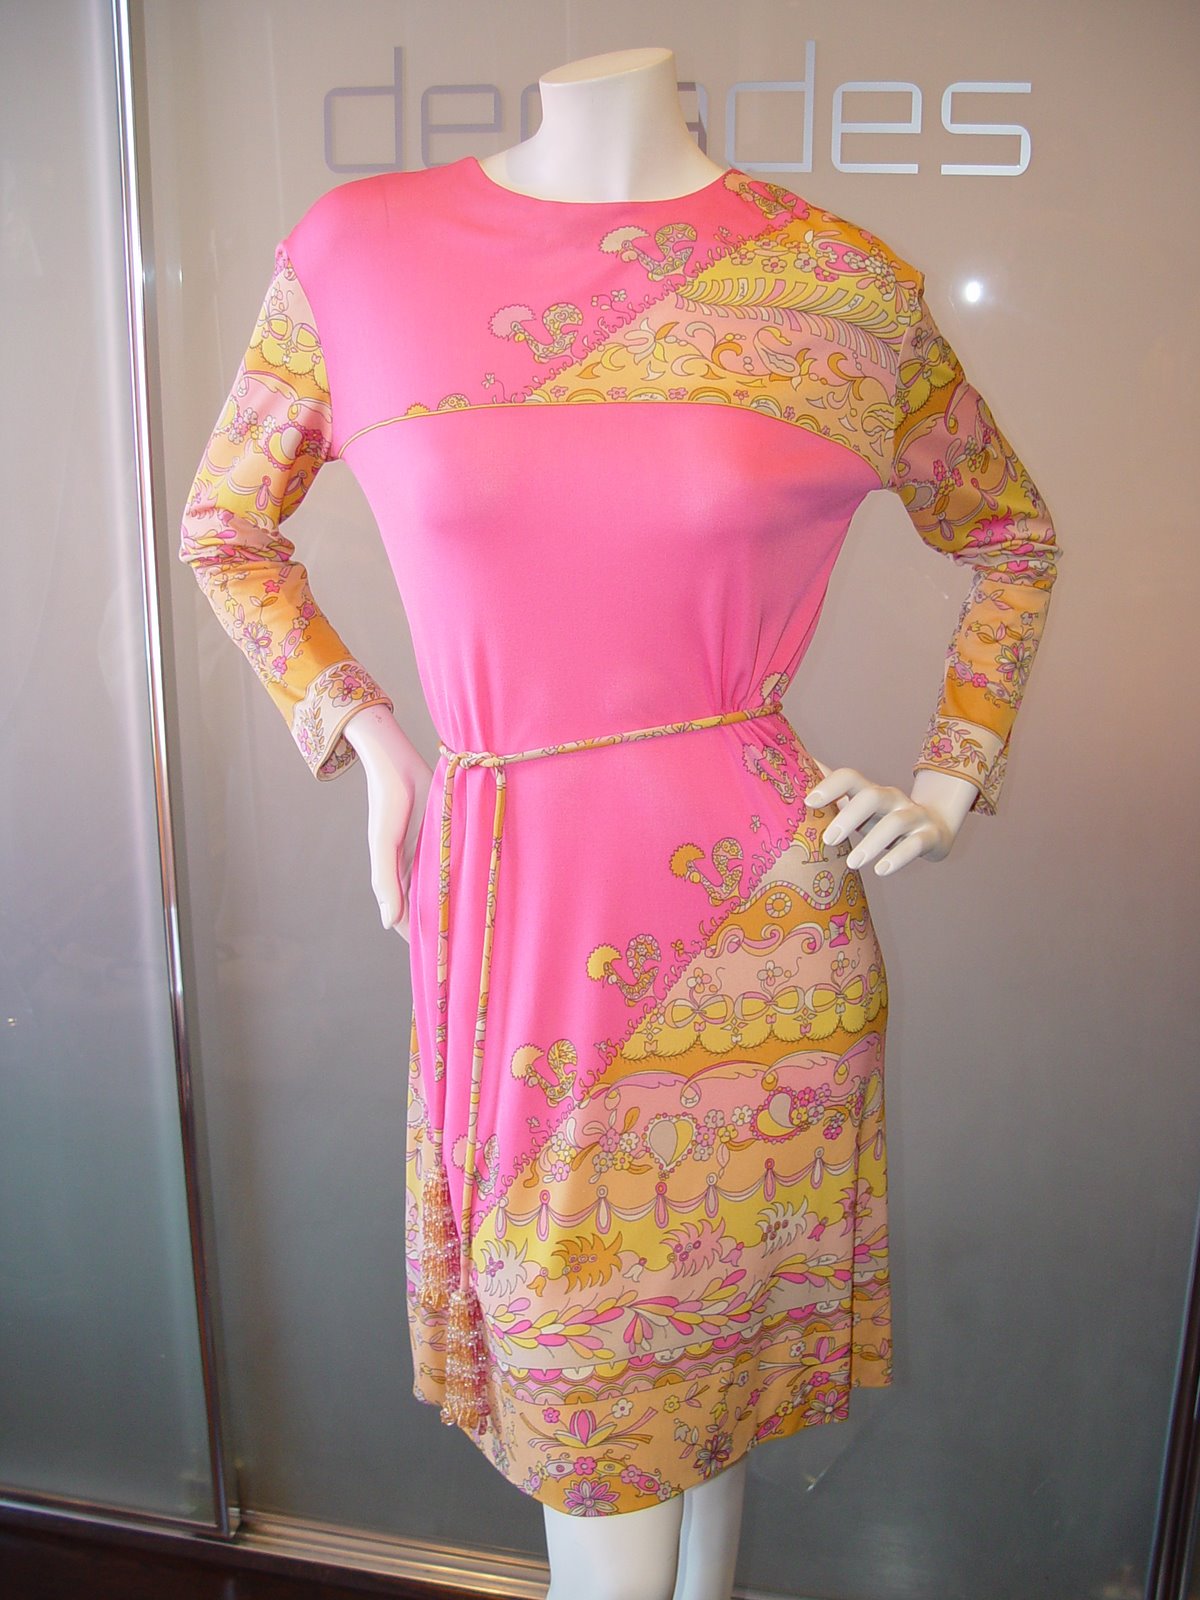 [EMILIO+PUCCI+FOR+SAKS+FIFTH+AVENUE+SHOCKING+PINK+CLASSIC+SHIFT+DRESS+WITH+GLASS+CRYSTAL+BELT+C+60S.JPG.JPG]